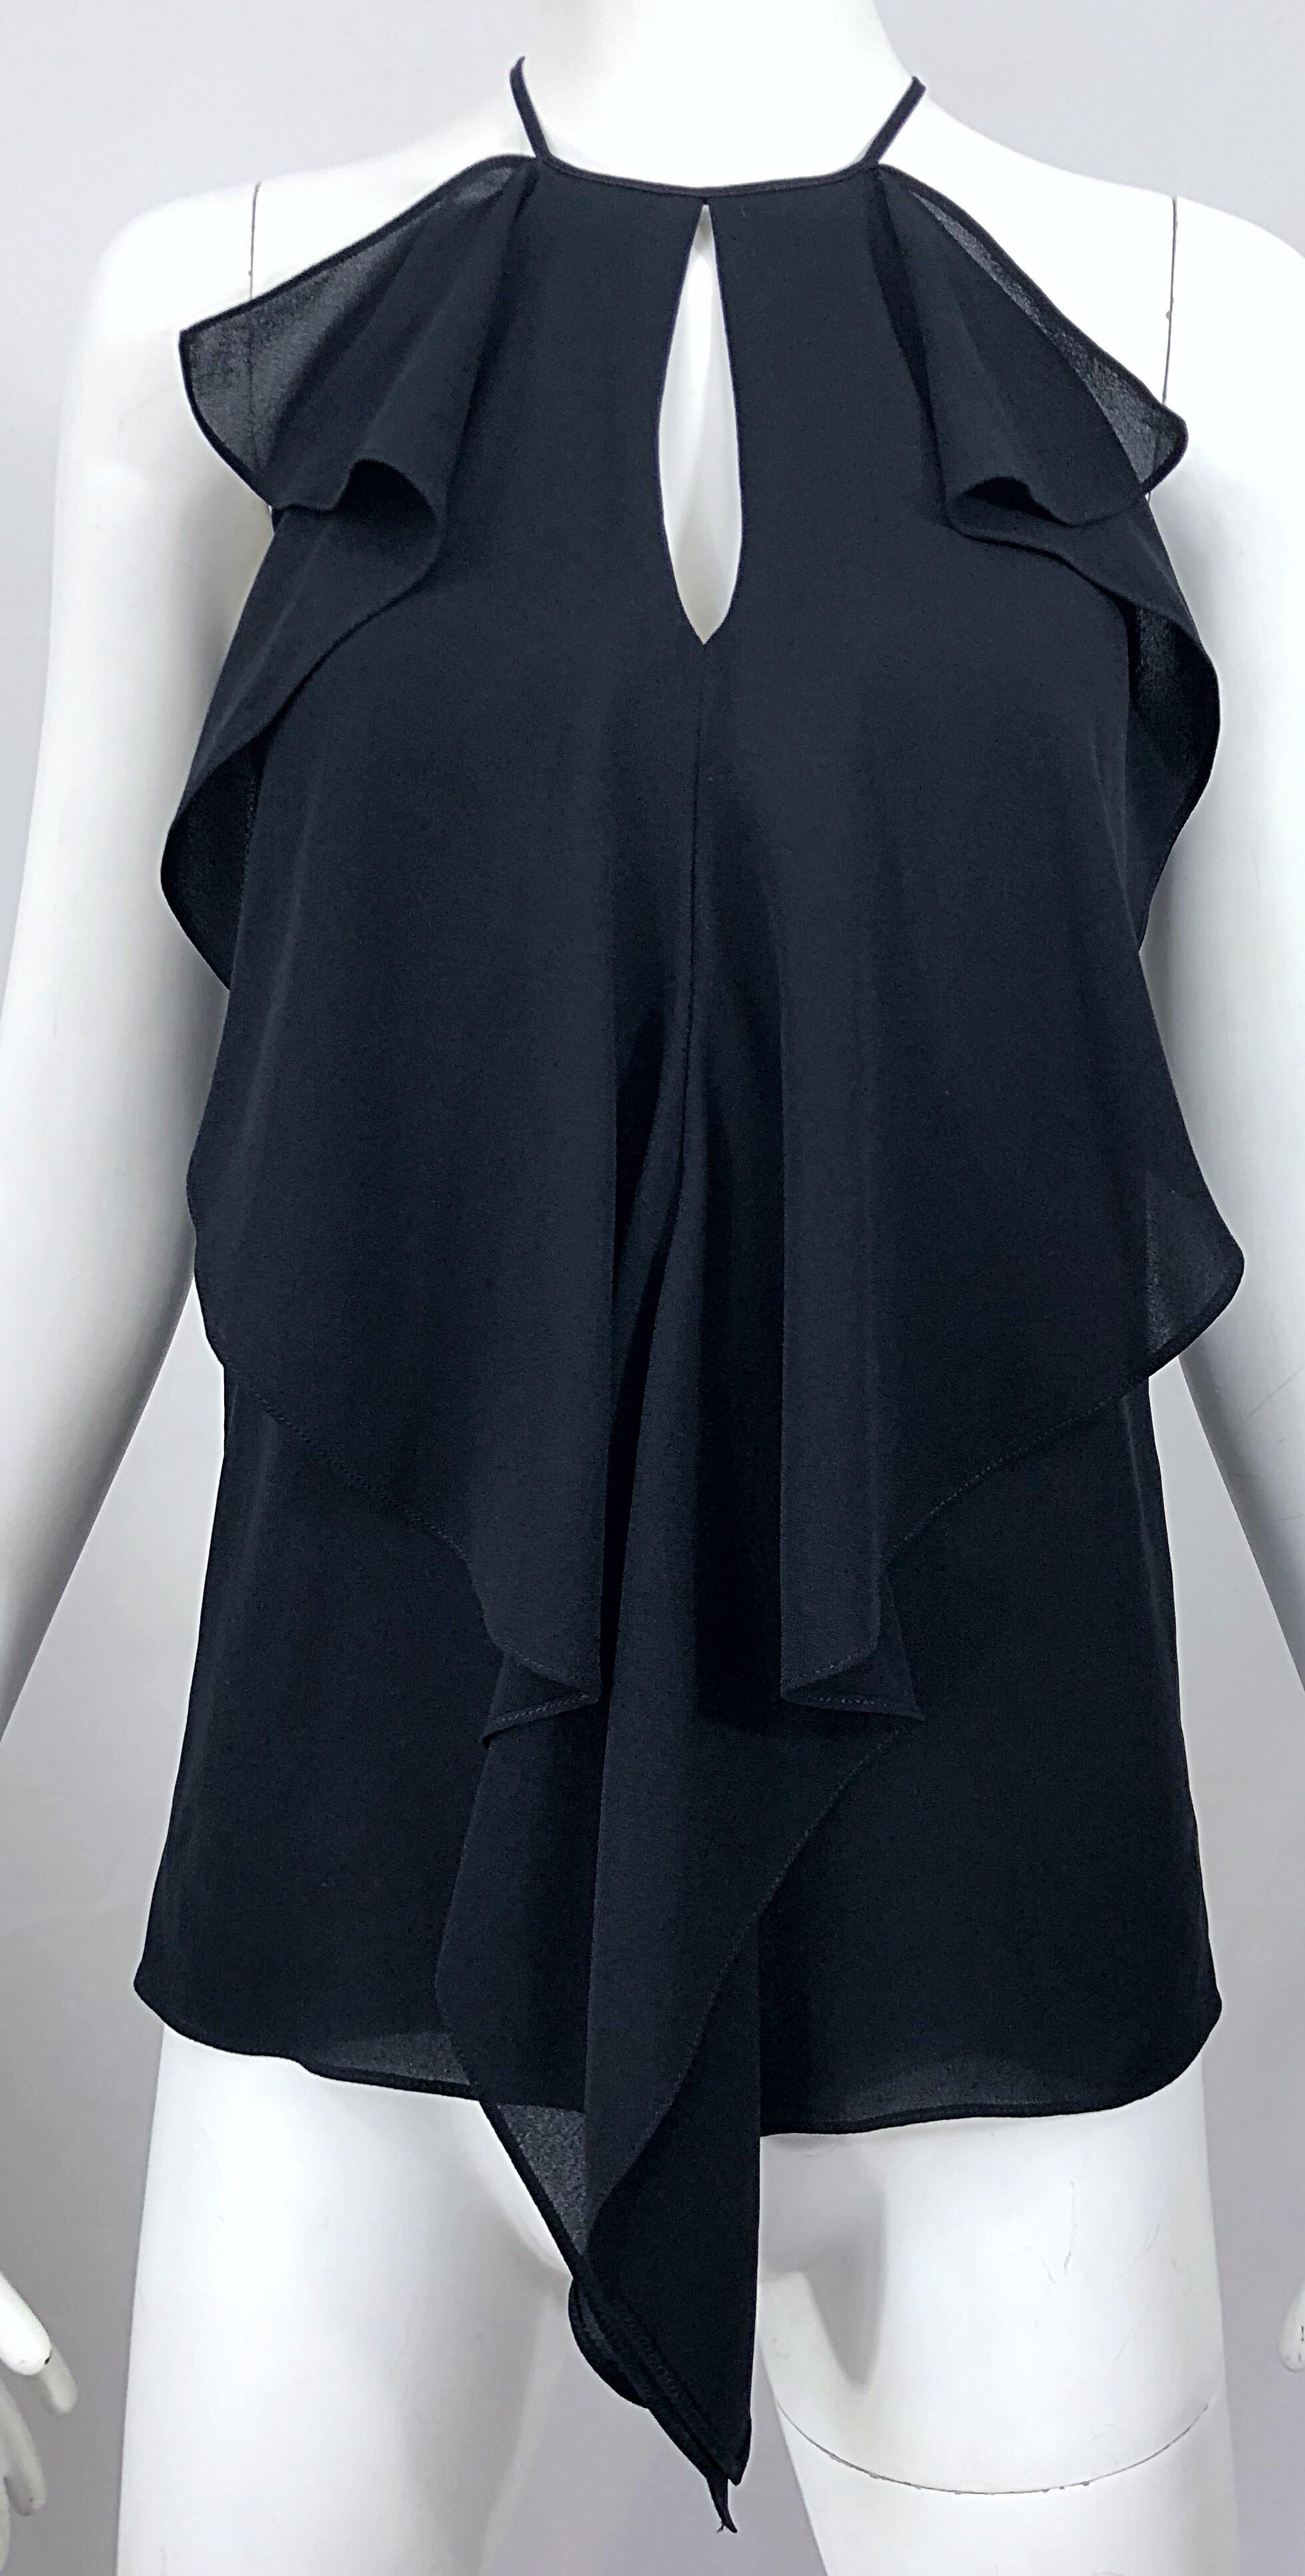 Michael Kors Collection Early 2000s Size 2 / 4 Black Silk Chiffon Sleeveless Top For Sale 2